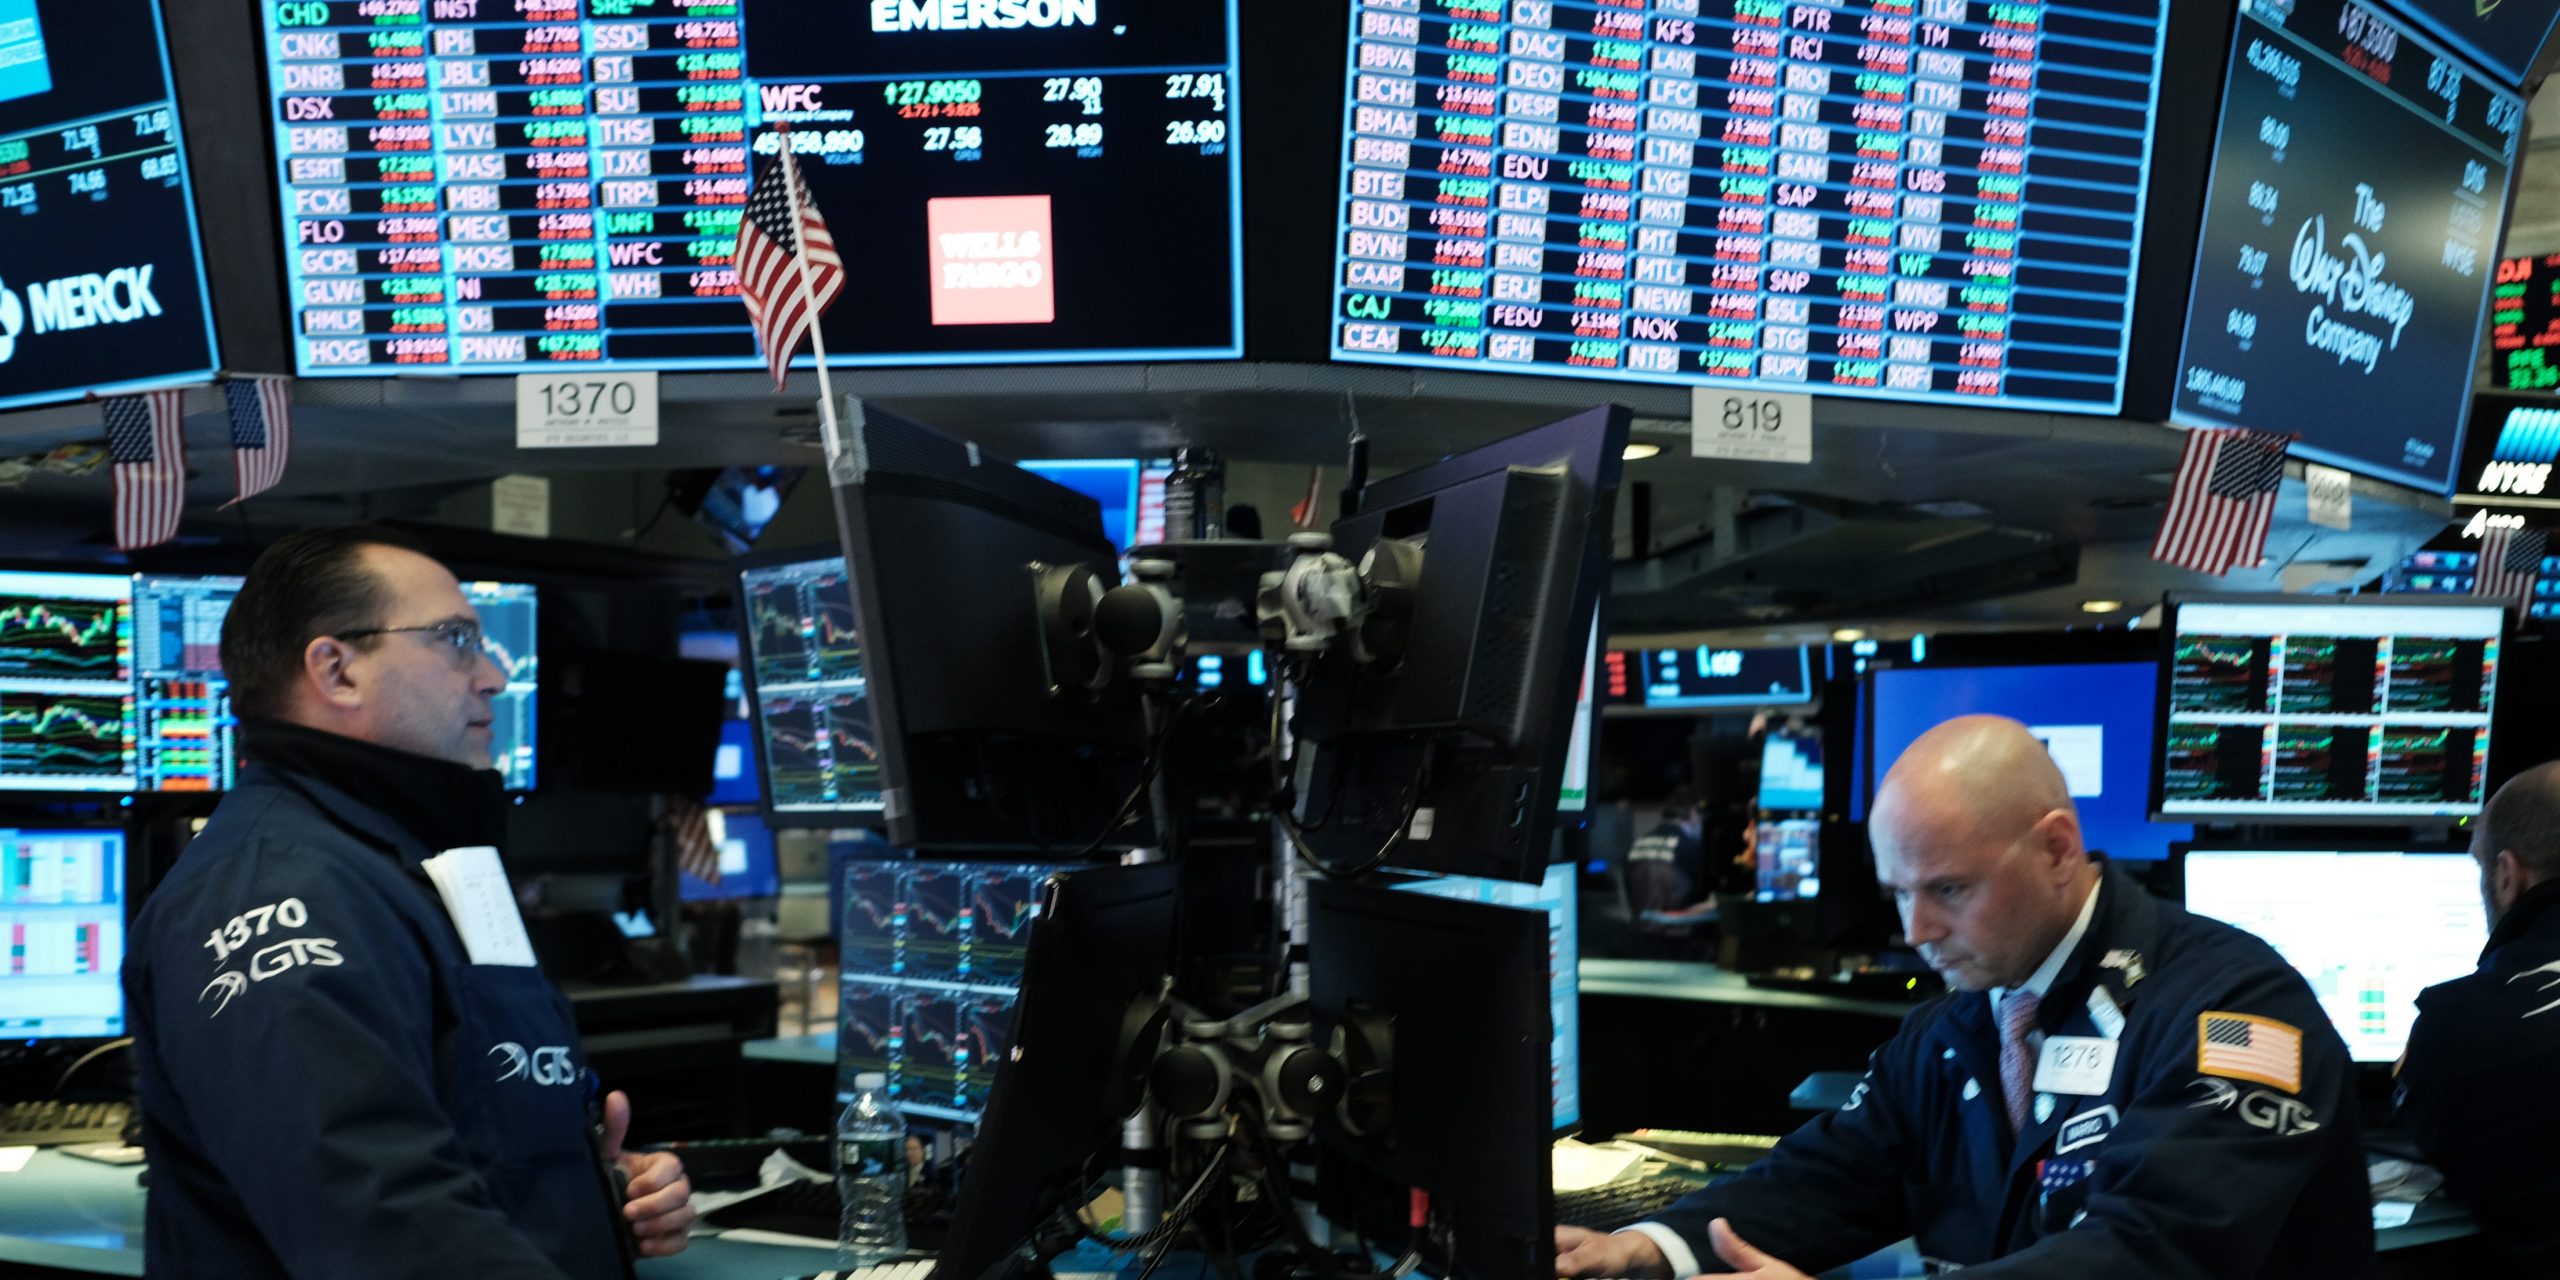 Traders work on the floor of the New York Stock Exchange (NYSE) on March 18, 2020 in New York City.